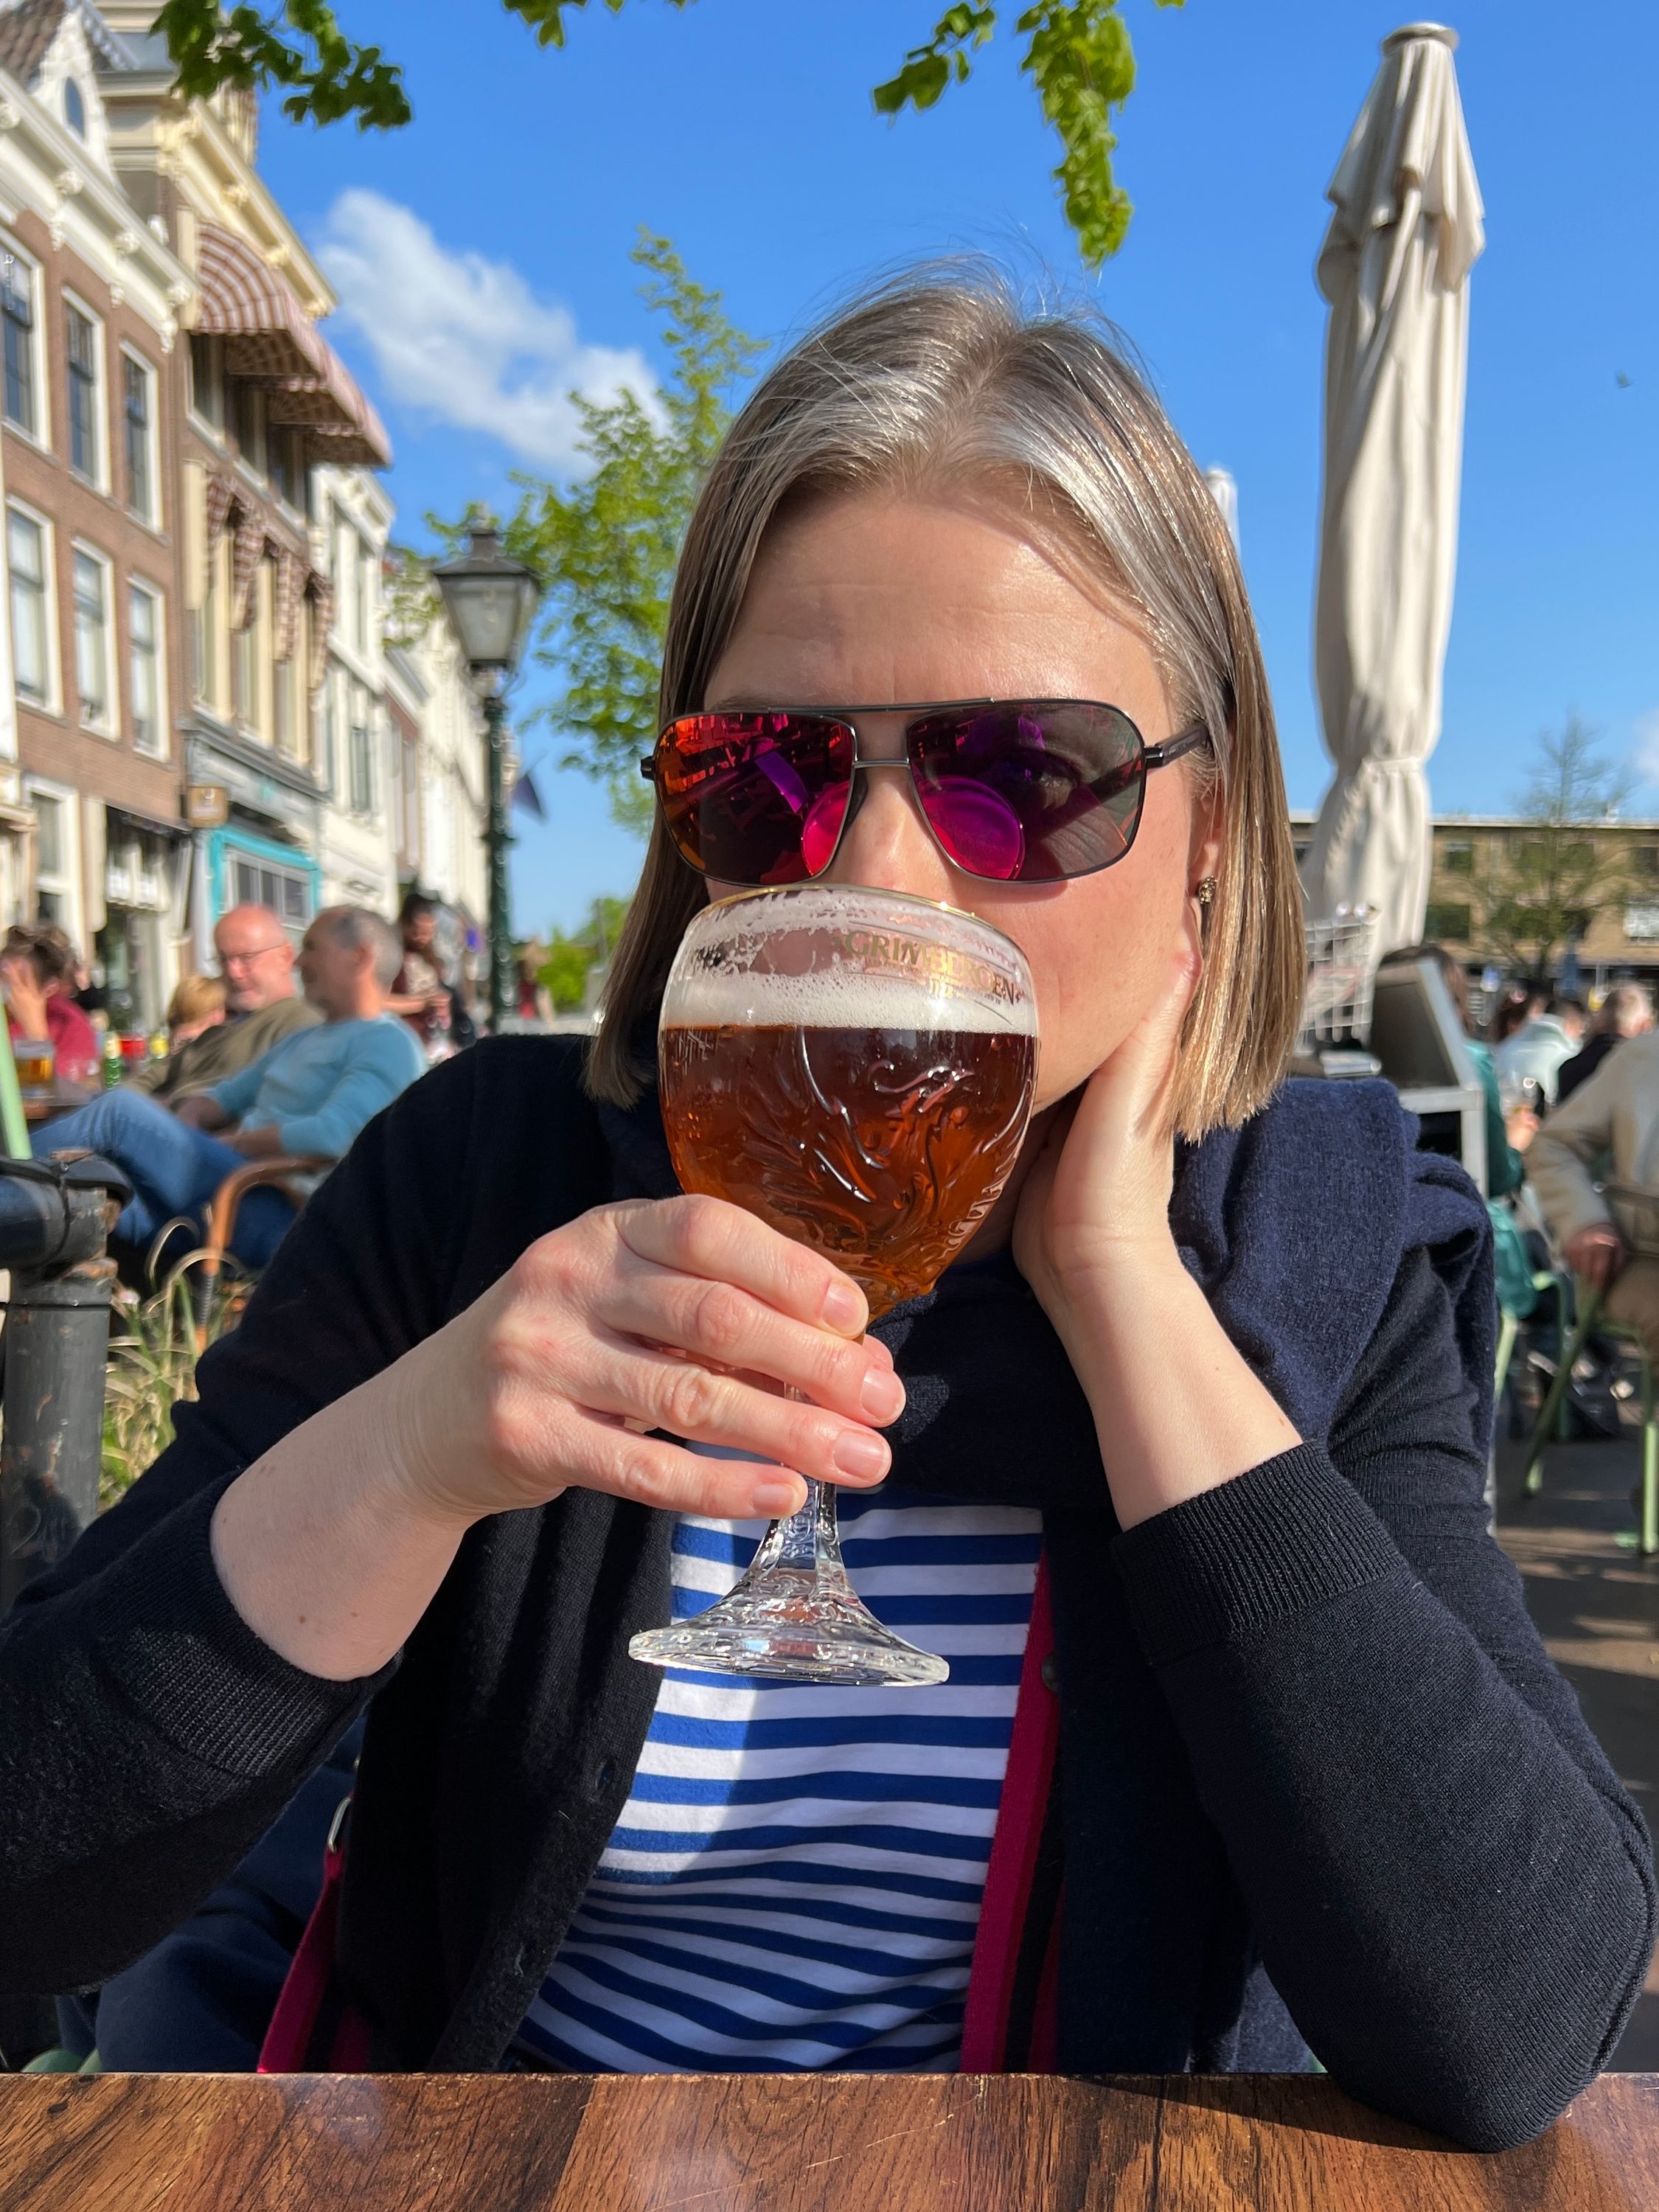 Kate enjoying a beer in the sunshine